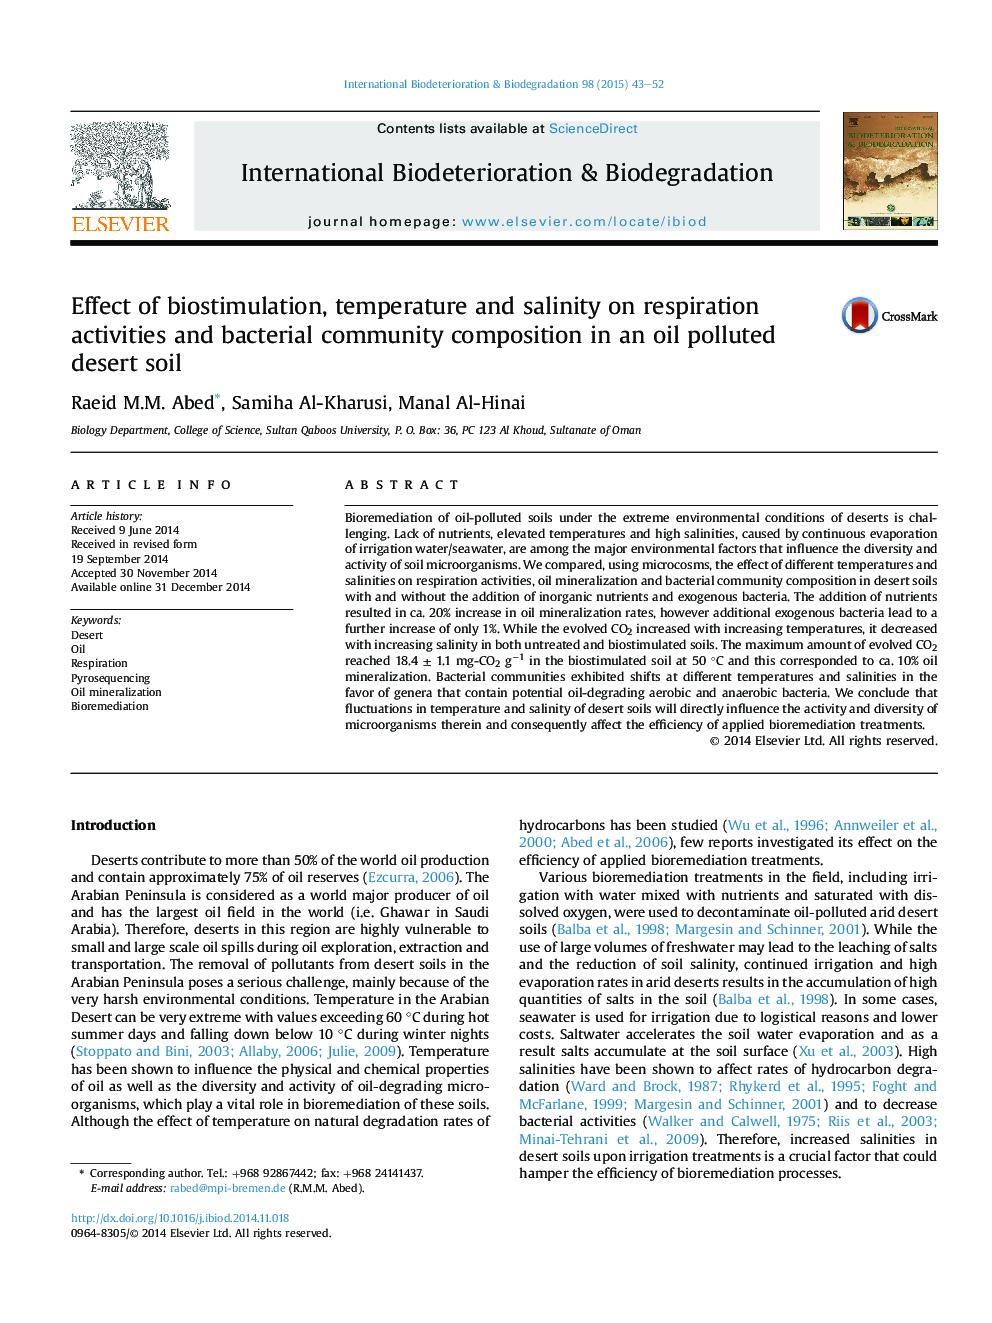 Effect of biostimulation, temperature and salinity on respiration activities and bacterial community composition in an oil polluted desert soil